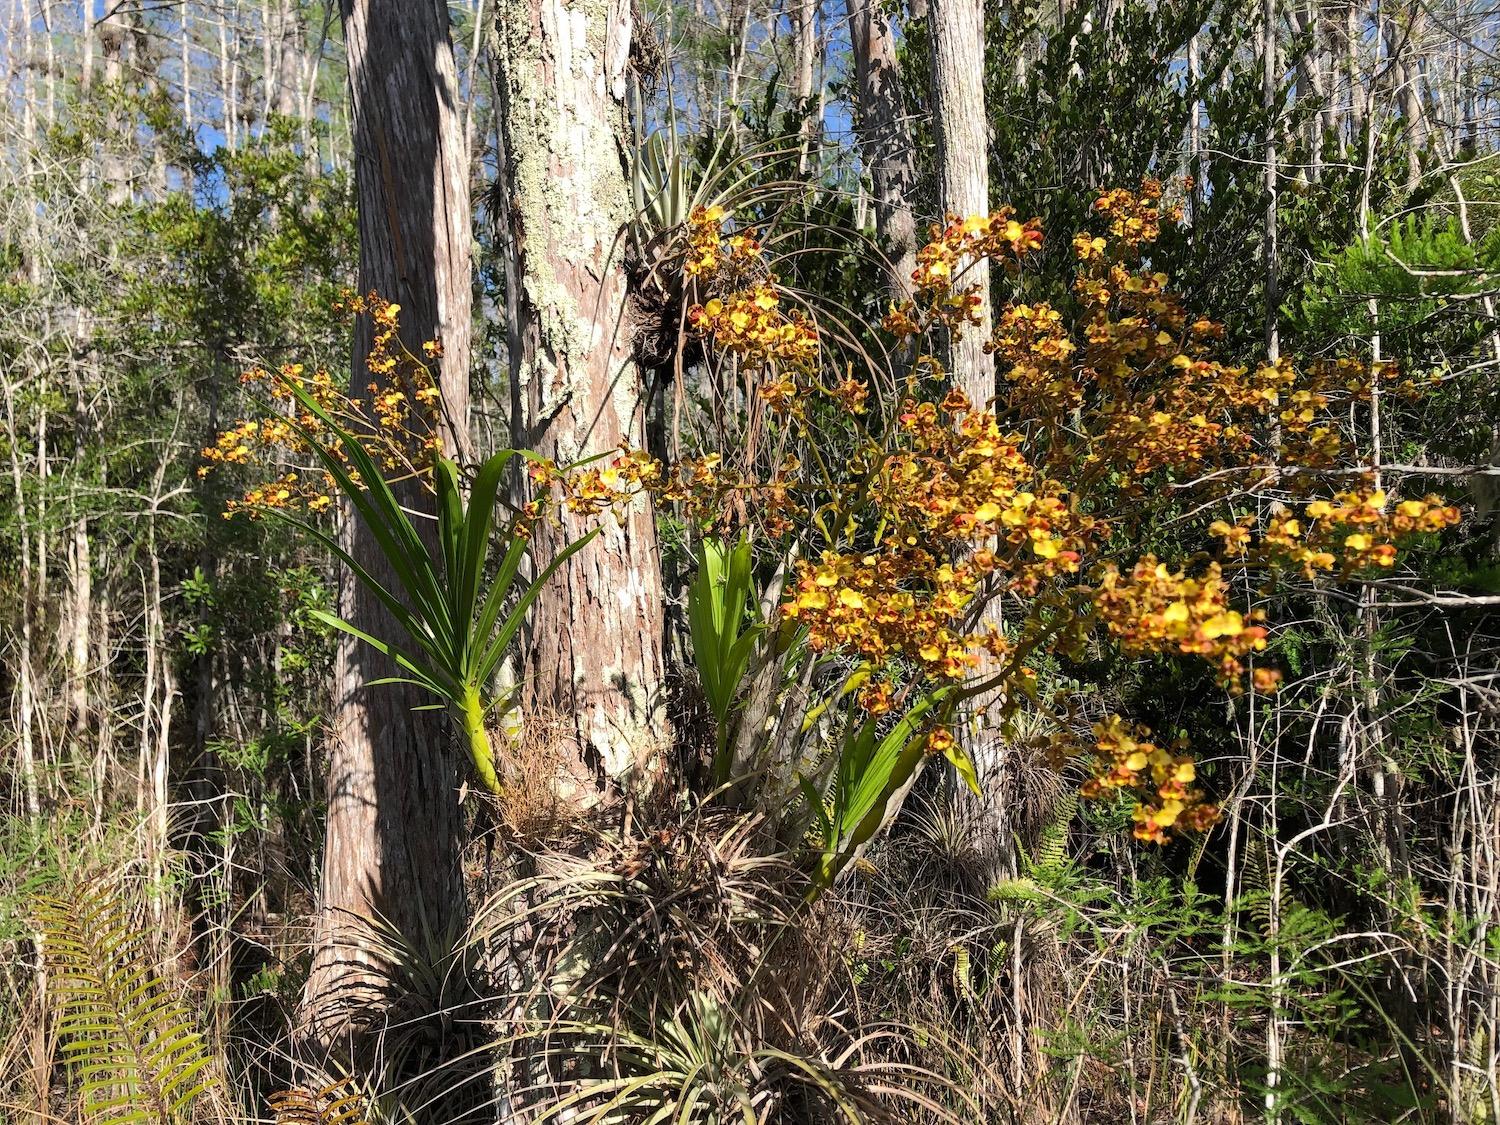 A rare cigar orchid blooms on the side of a cypress tree in the Big Cypress National Preserve/Dr. Hon Liu